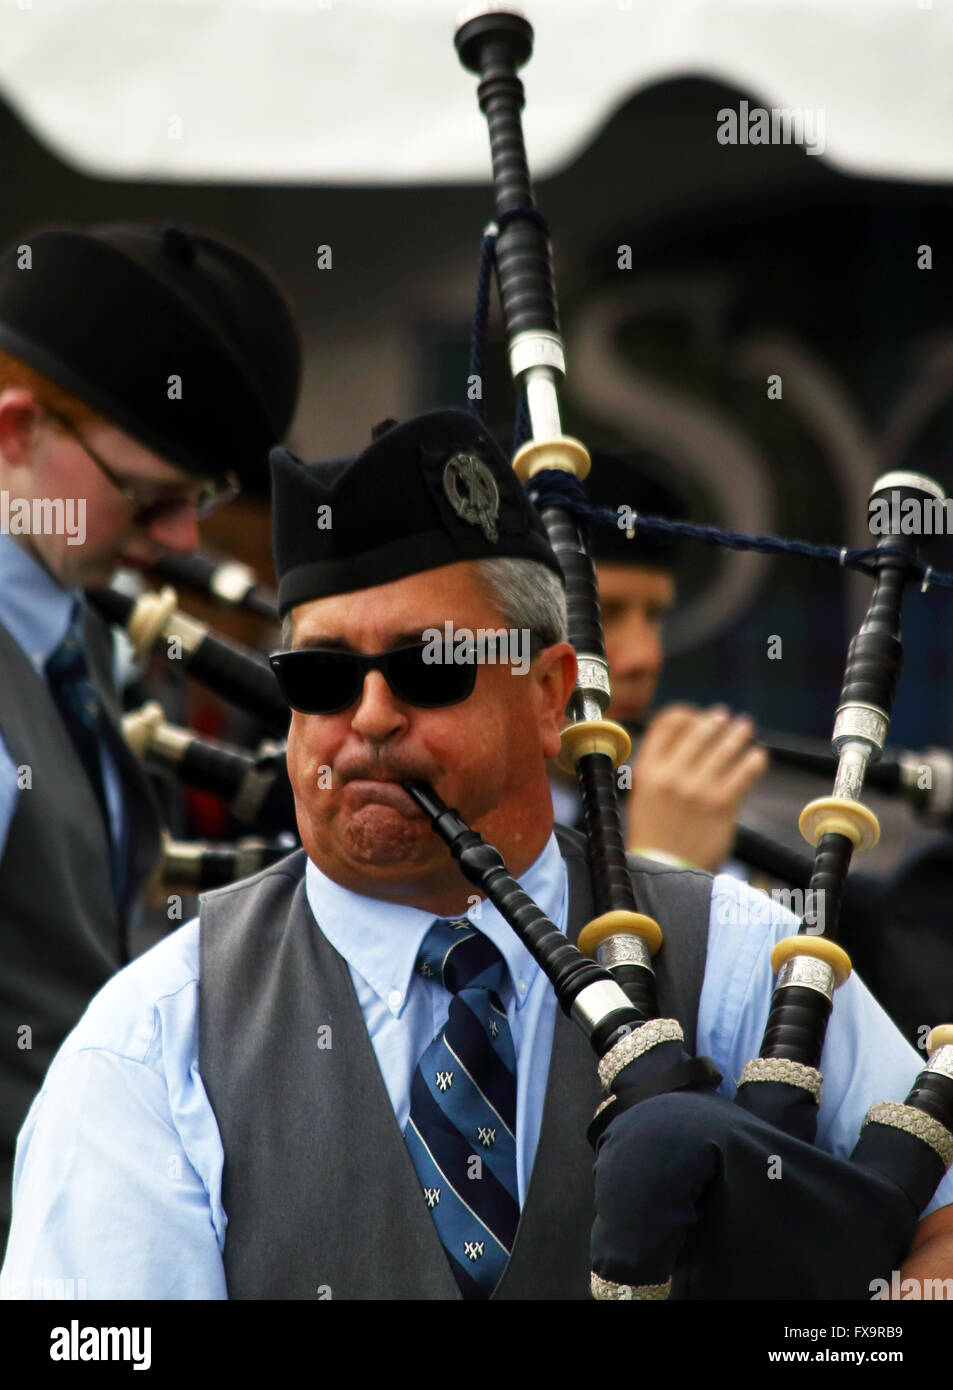 A bagpiper plays at the Inaugural Highland Games in Myrtle Beach South Carolina. Photographed March 19, 2016 Stock Photo